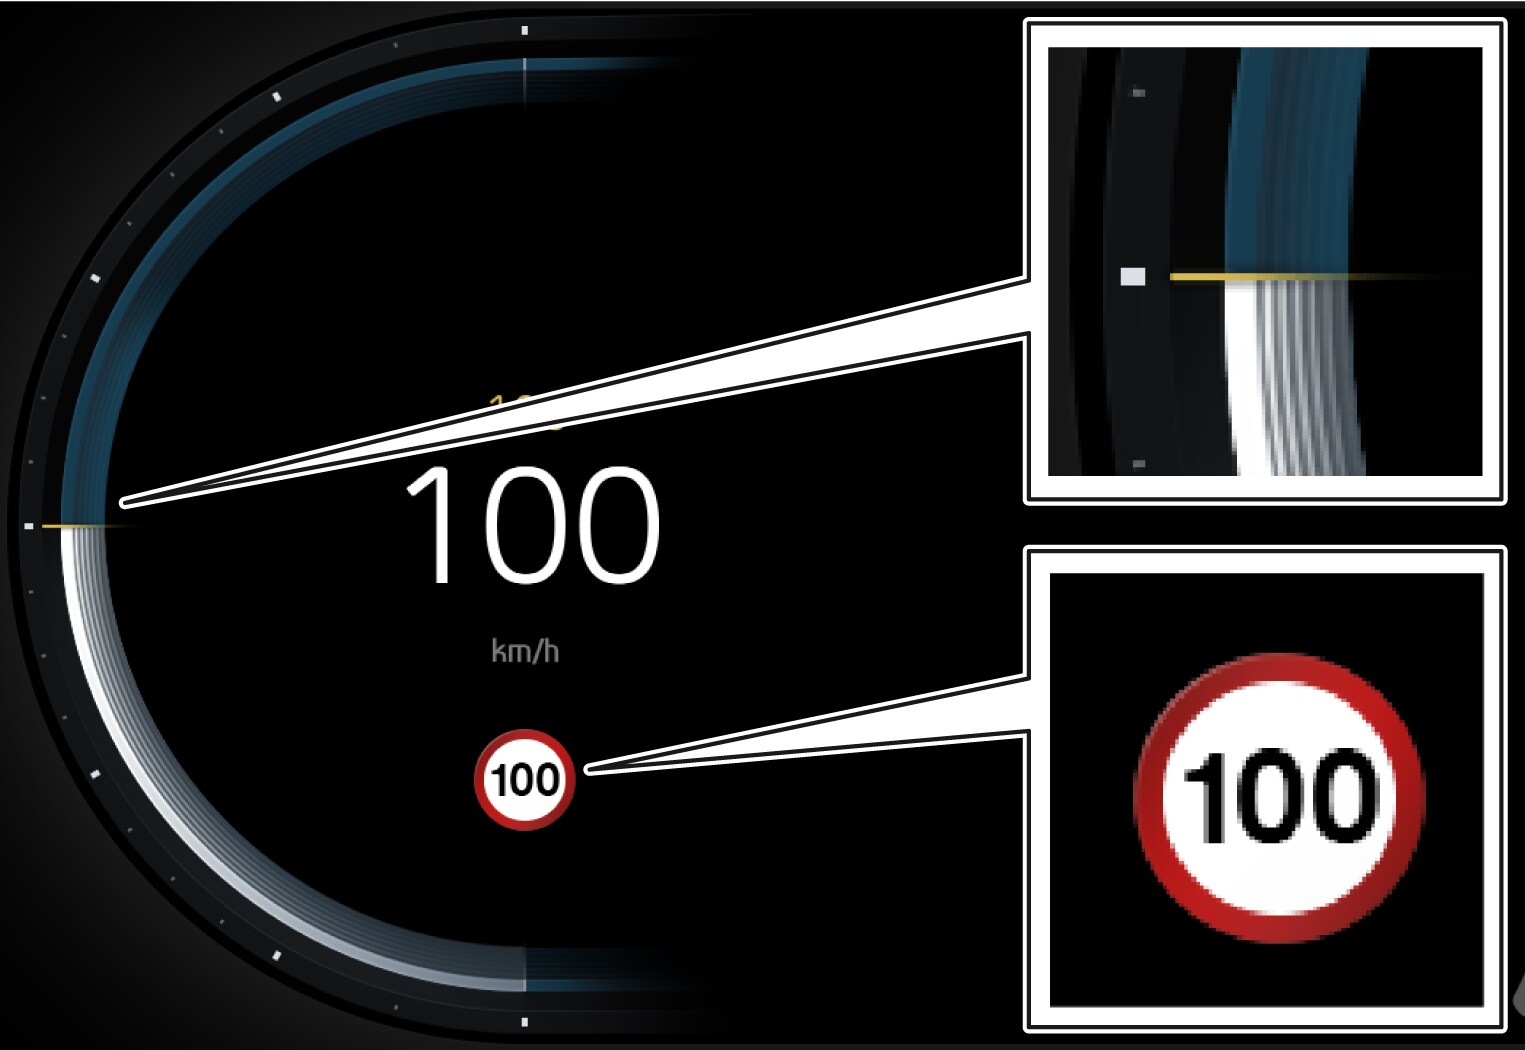 Px-20w37-iCup-Road Sign Information example (EU)